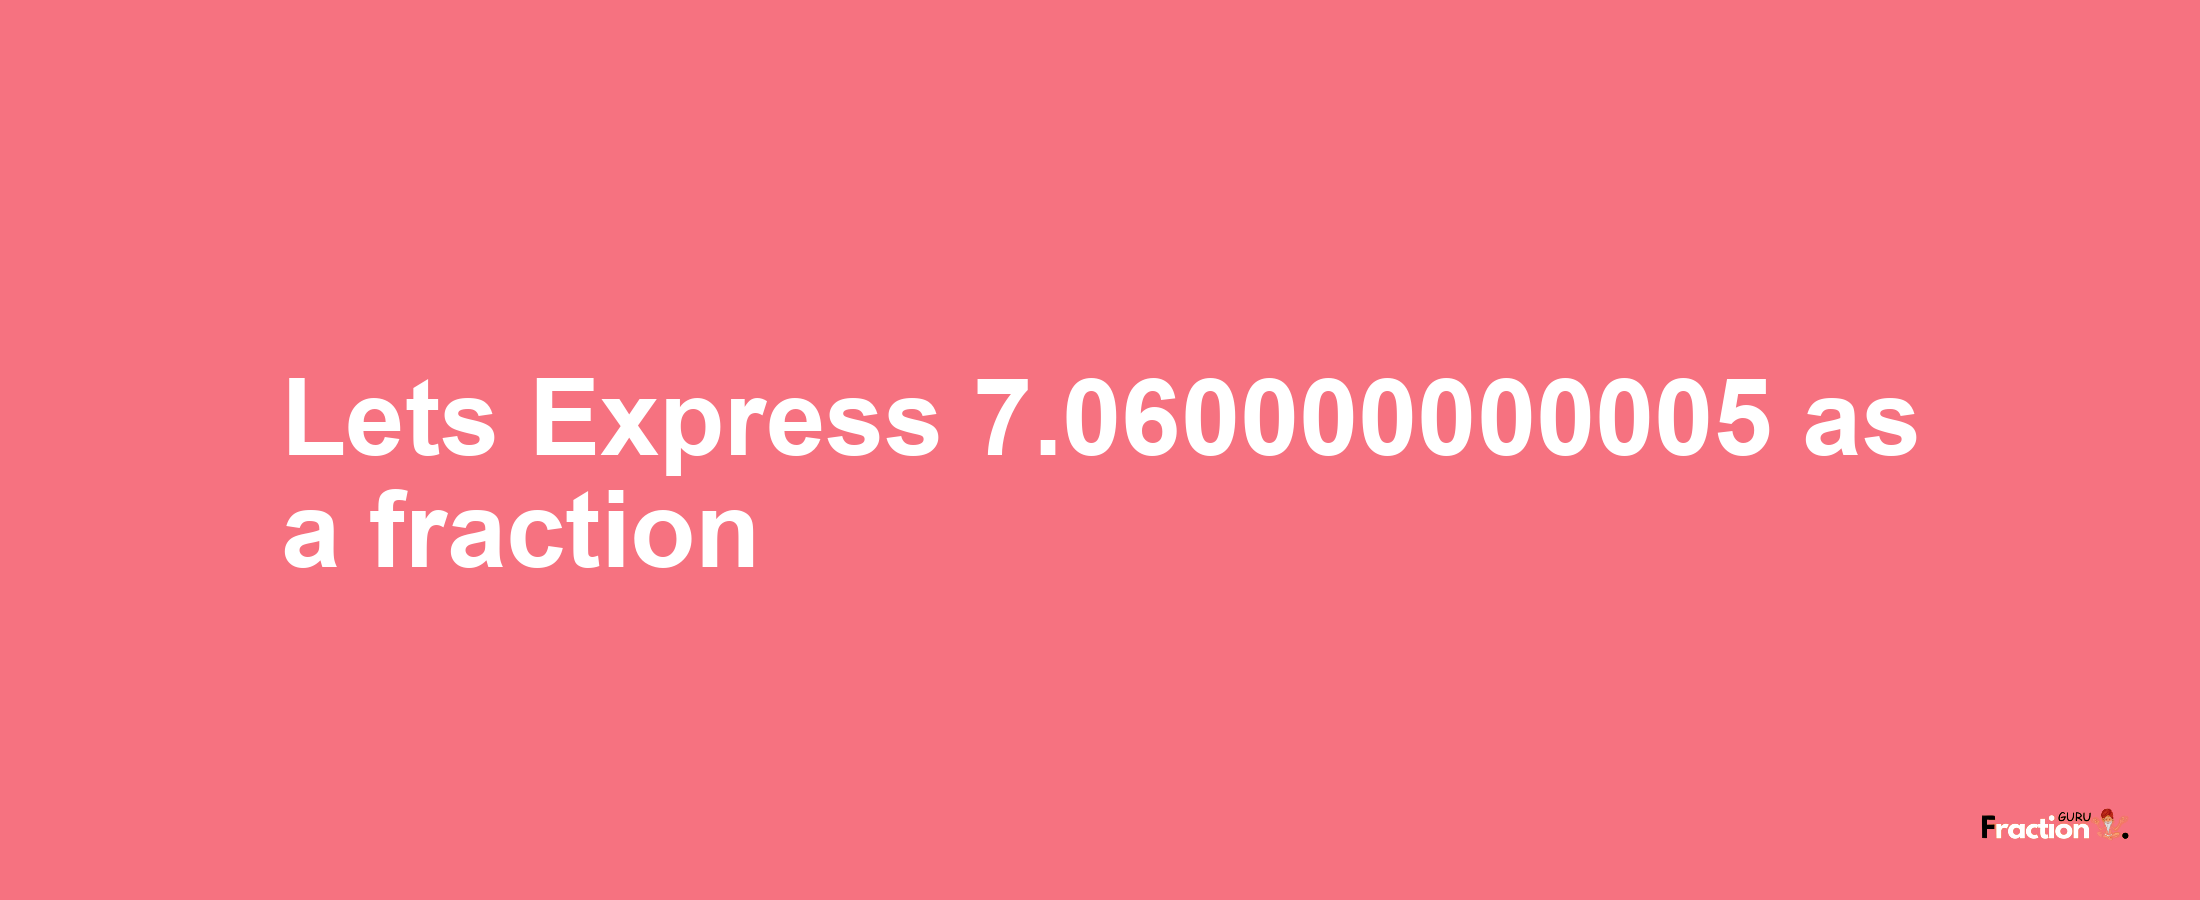 Lets Express 7.060000000005 as afraction